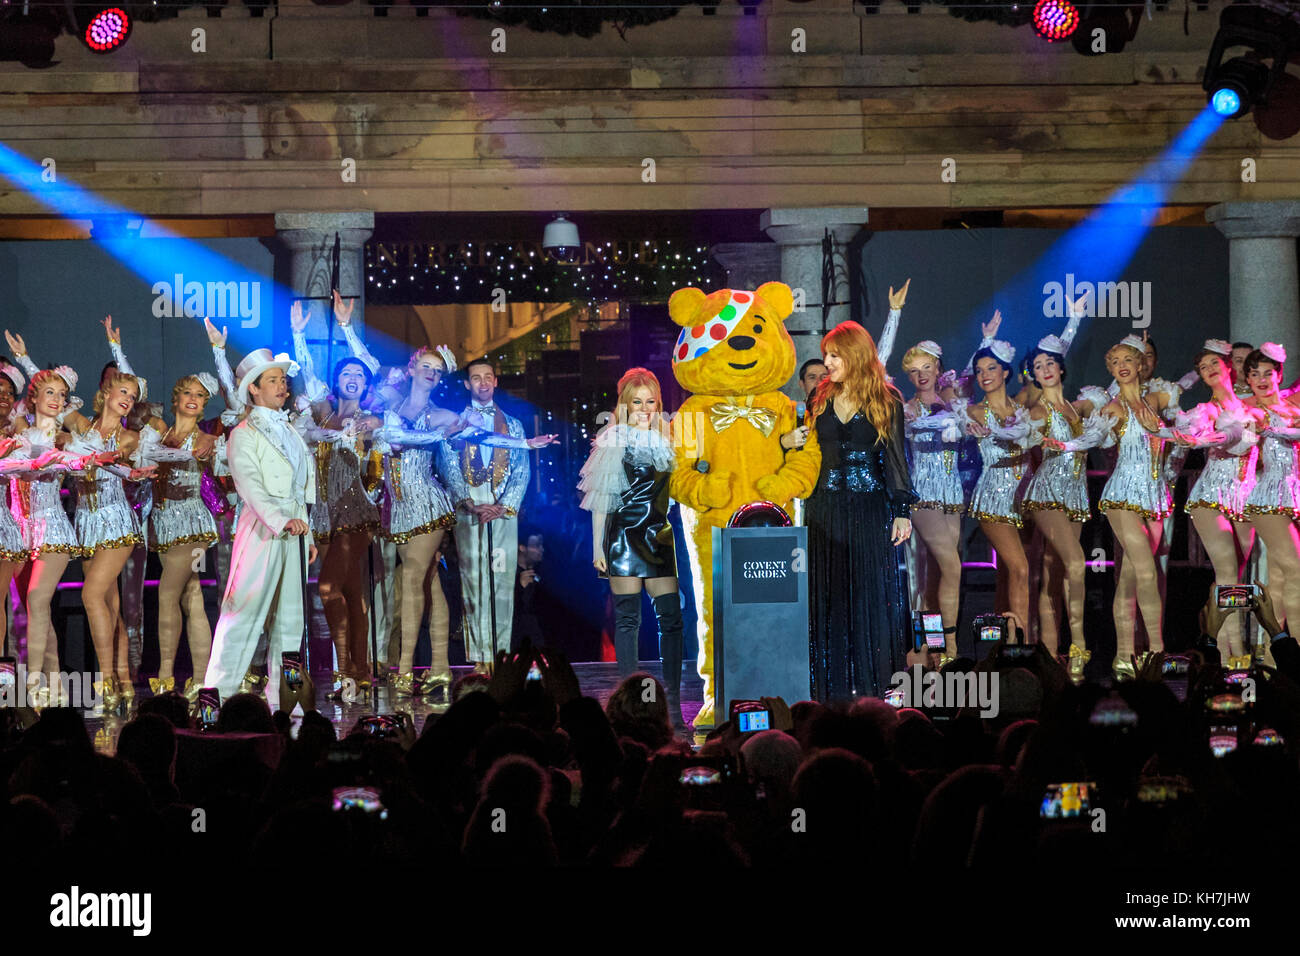 Covent Garden, London, UK, 14th Nov 2017. The Covent Garden Christmas lights 2017 are switched on by Pudsy with special guests, singer Kylie Minogue and designer Charlotte Tilbury. Festive celebrations include performances from the acclaimed hit West End musical 42nd Street performing numbers from the show. Pudsey and his special guests Kylie switch on the lights in collaboration with BBC Children in Need this year. The Piazza hosts London’s biggest hand-picked Christmas tree. Credit: Imageplotter News and Sports/Alamy Live News Stock Photo